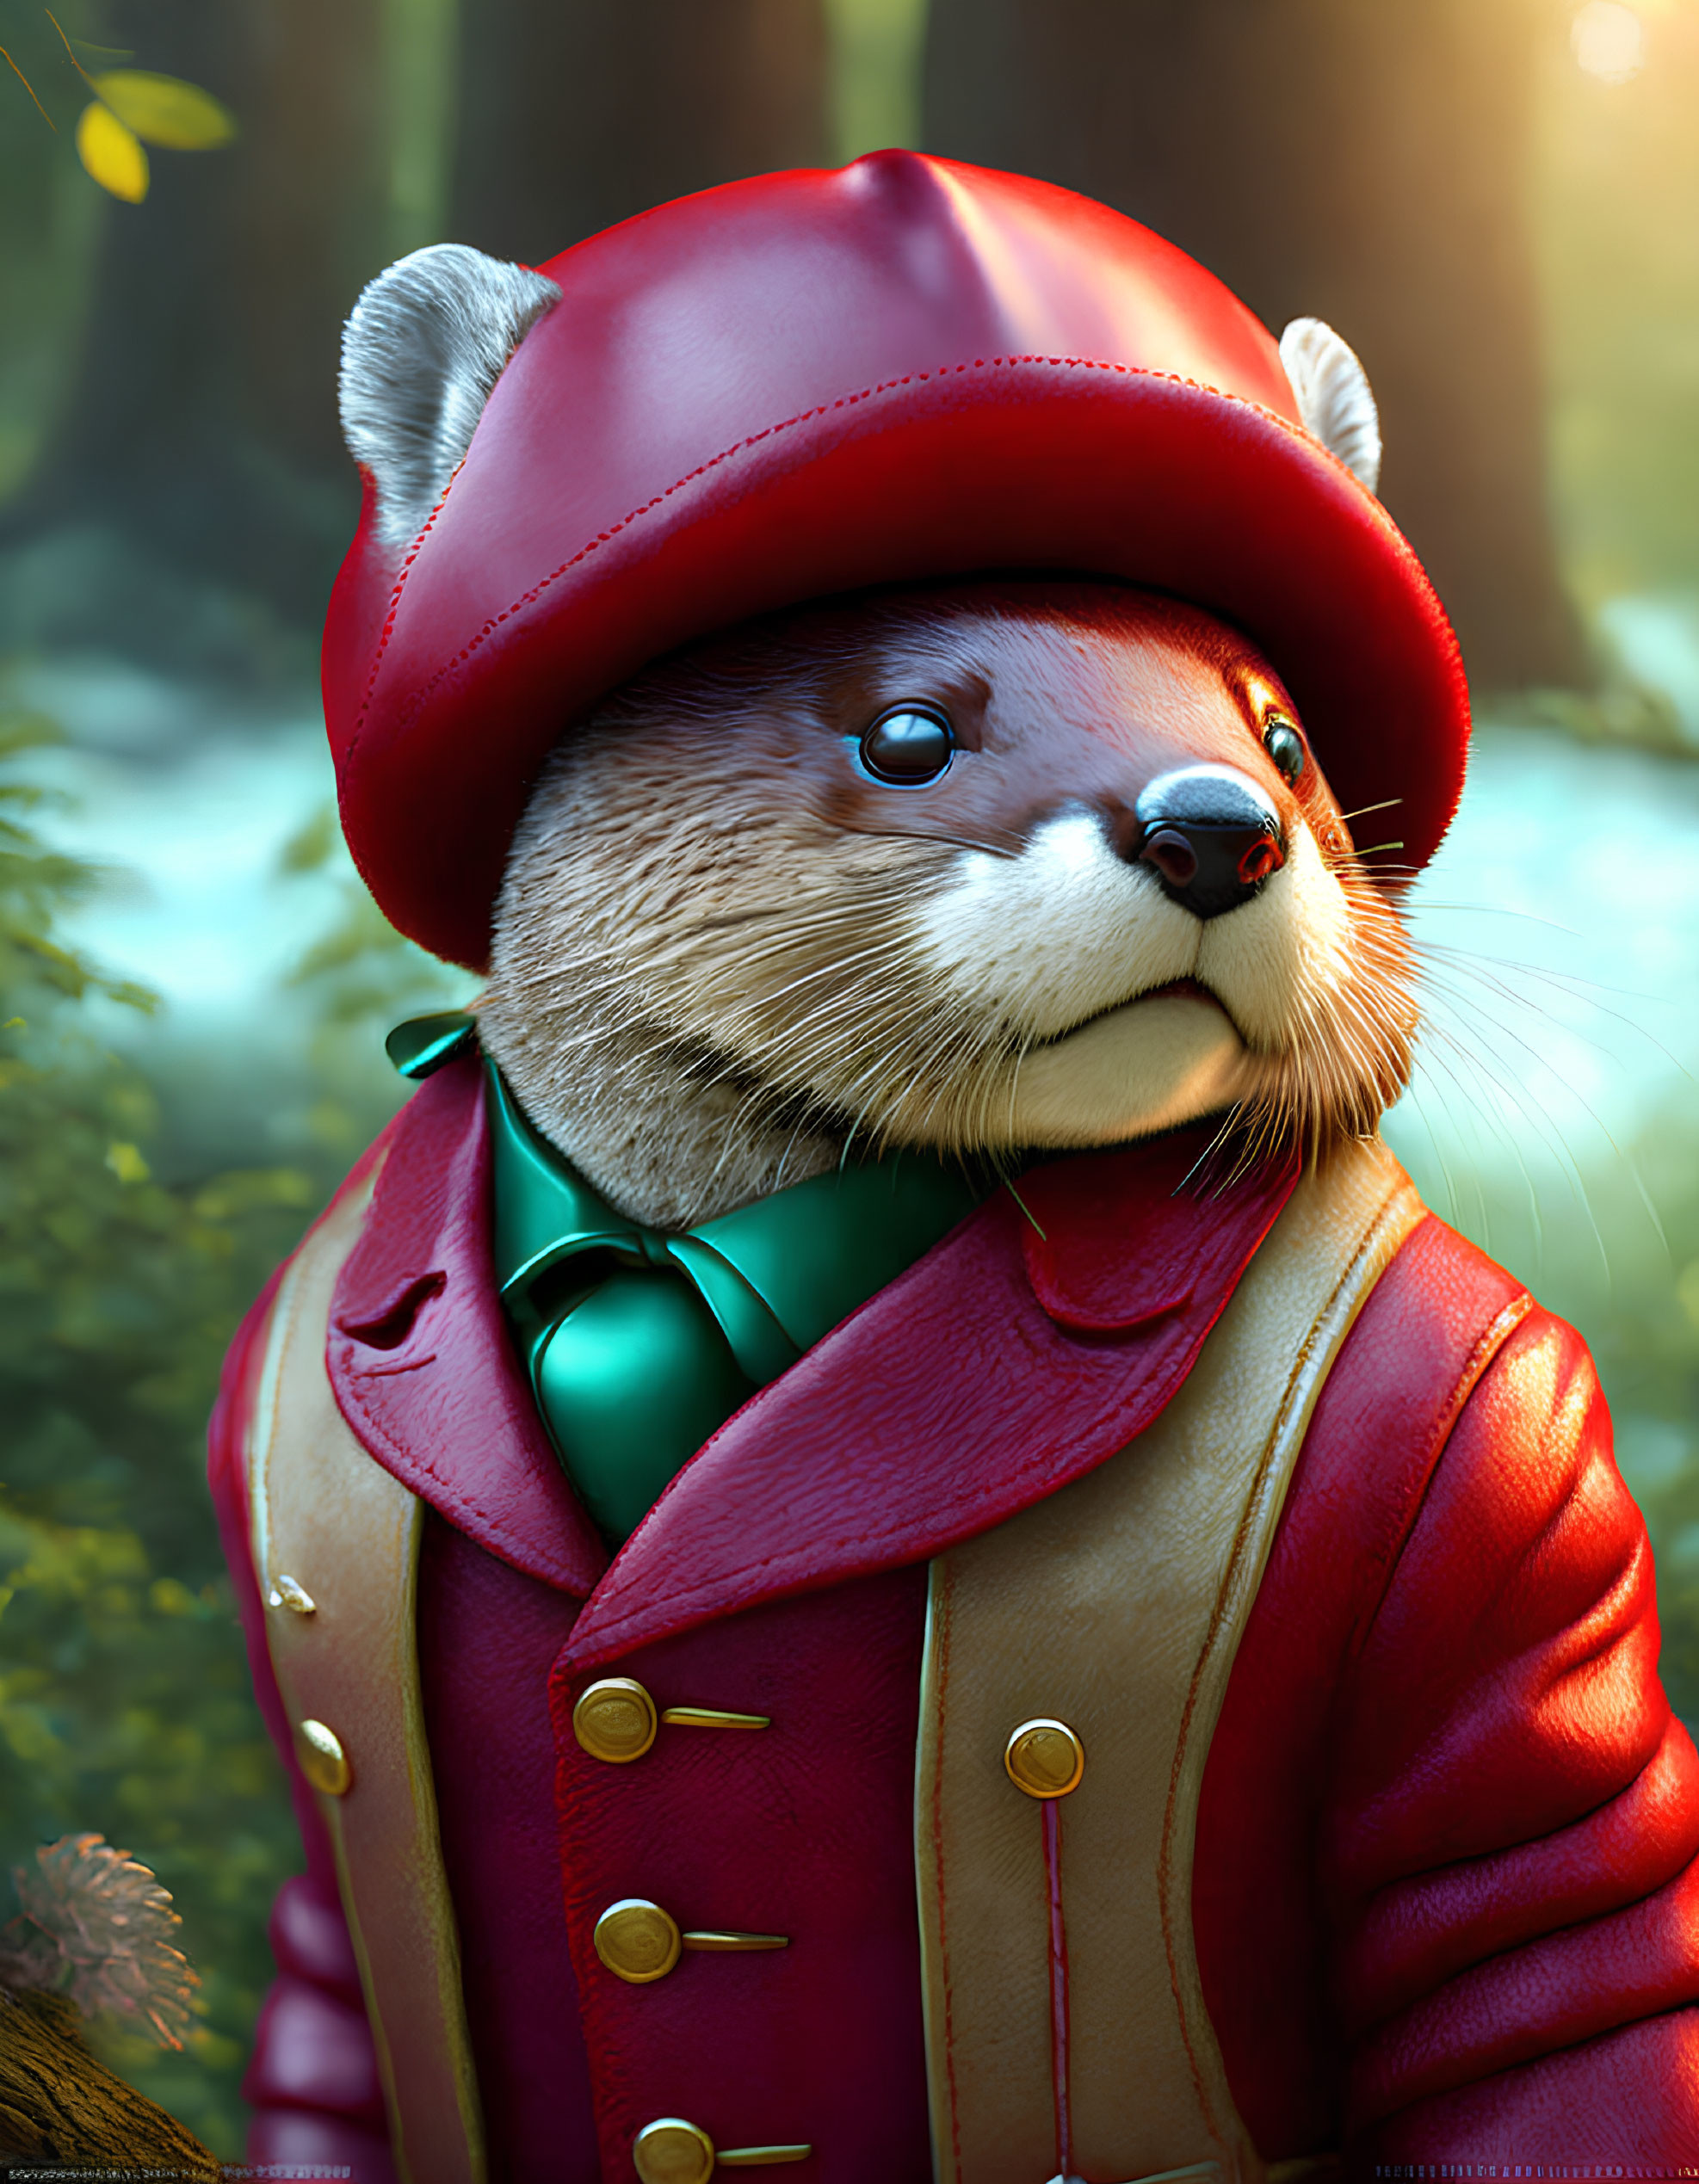 Stylish anthropomorphic otter in red leather jacket and cap in sunlit forest